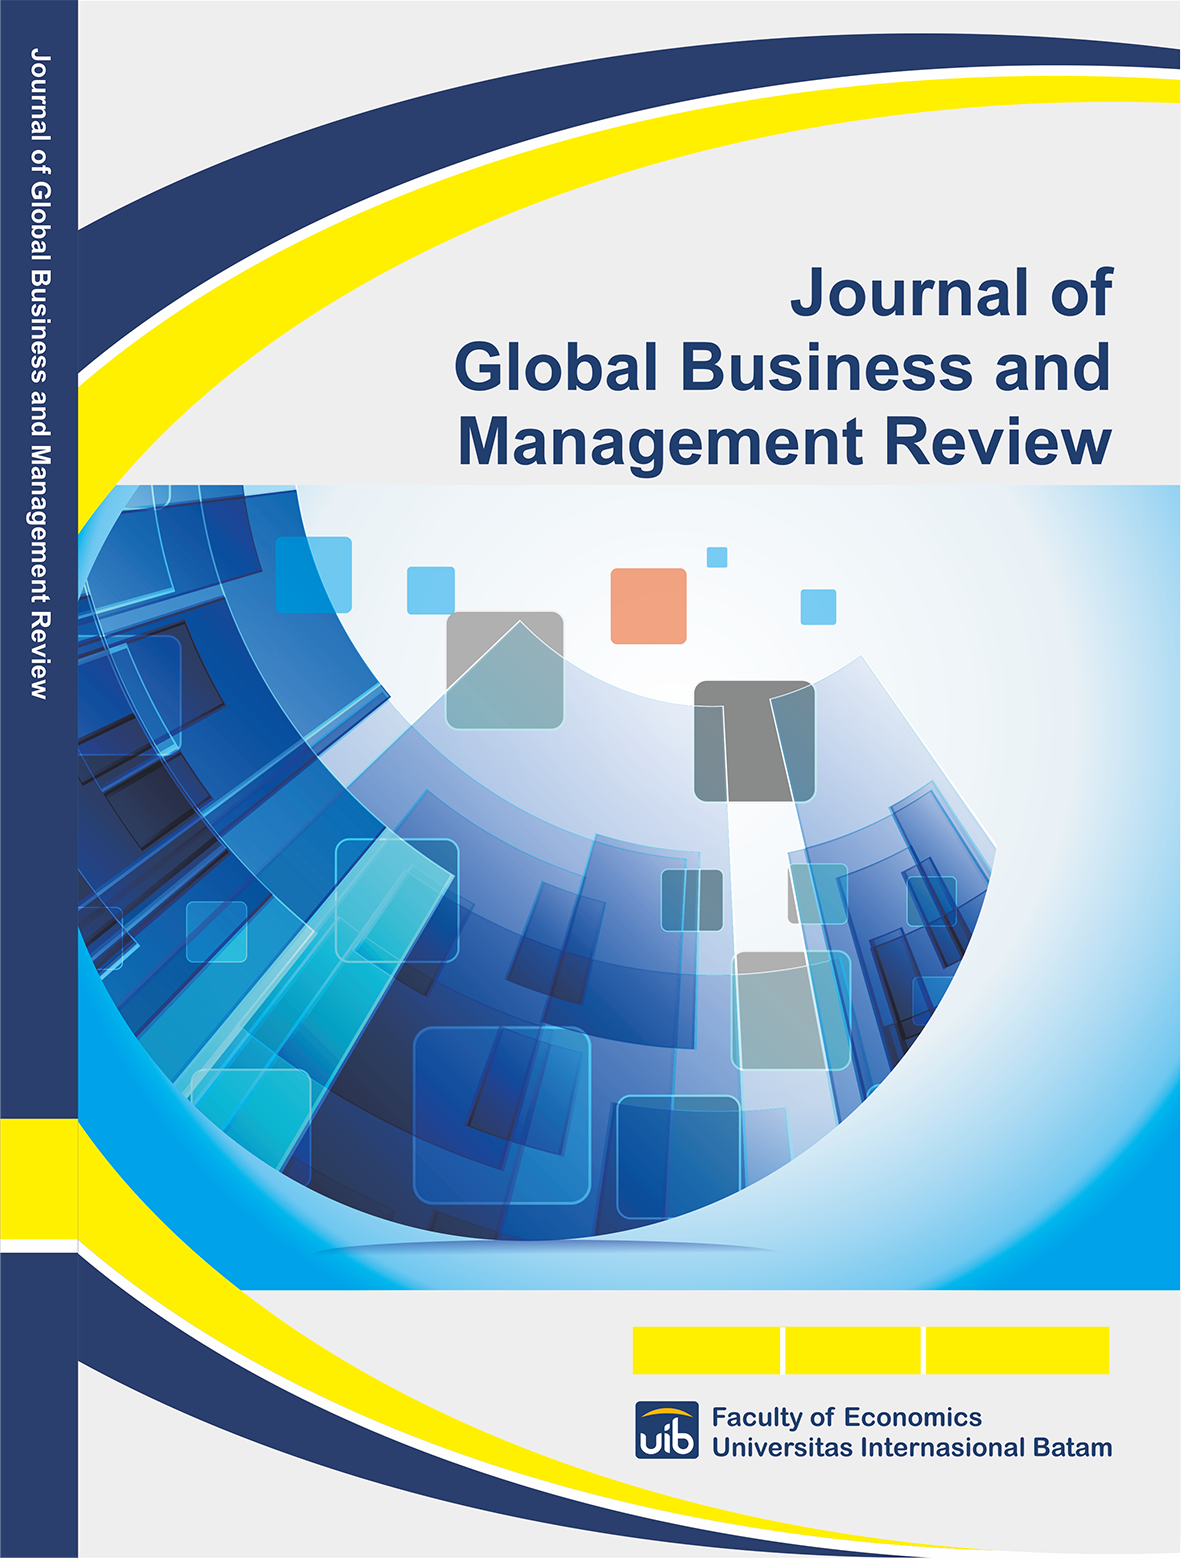 					View Vol. 4 No. 2 (2022): Journal of Global Business and Management Review
				